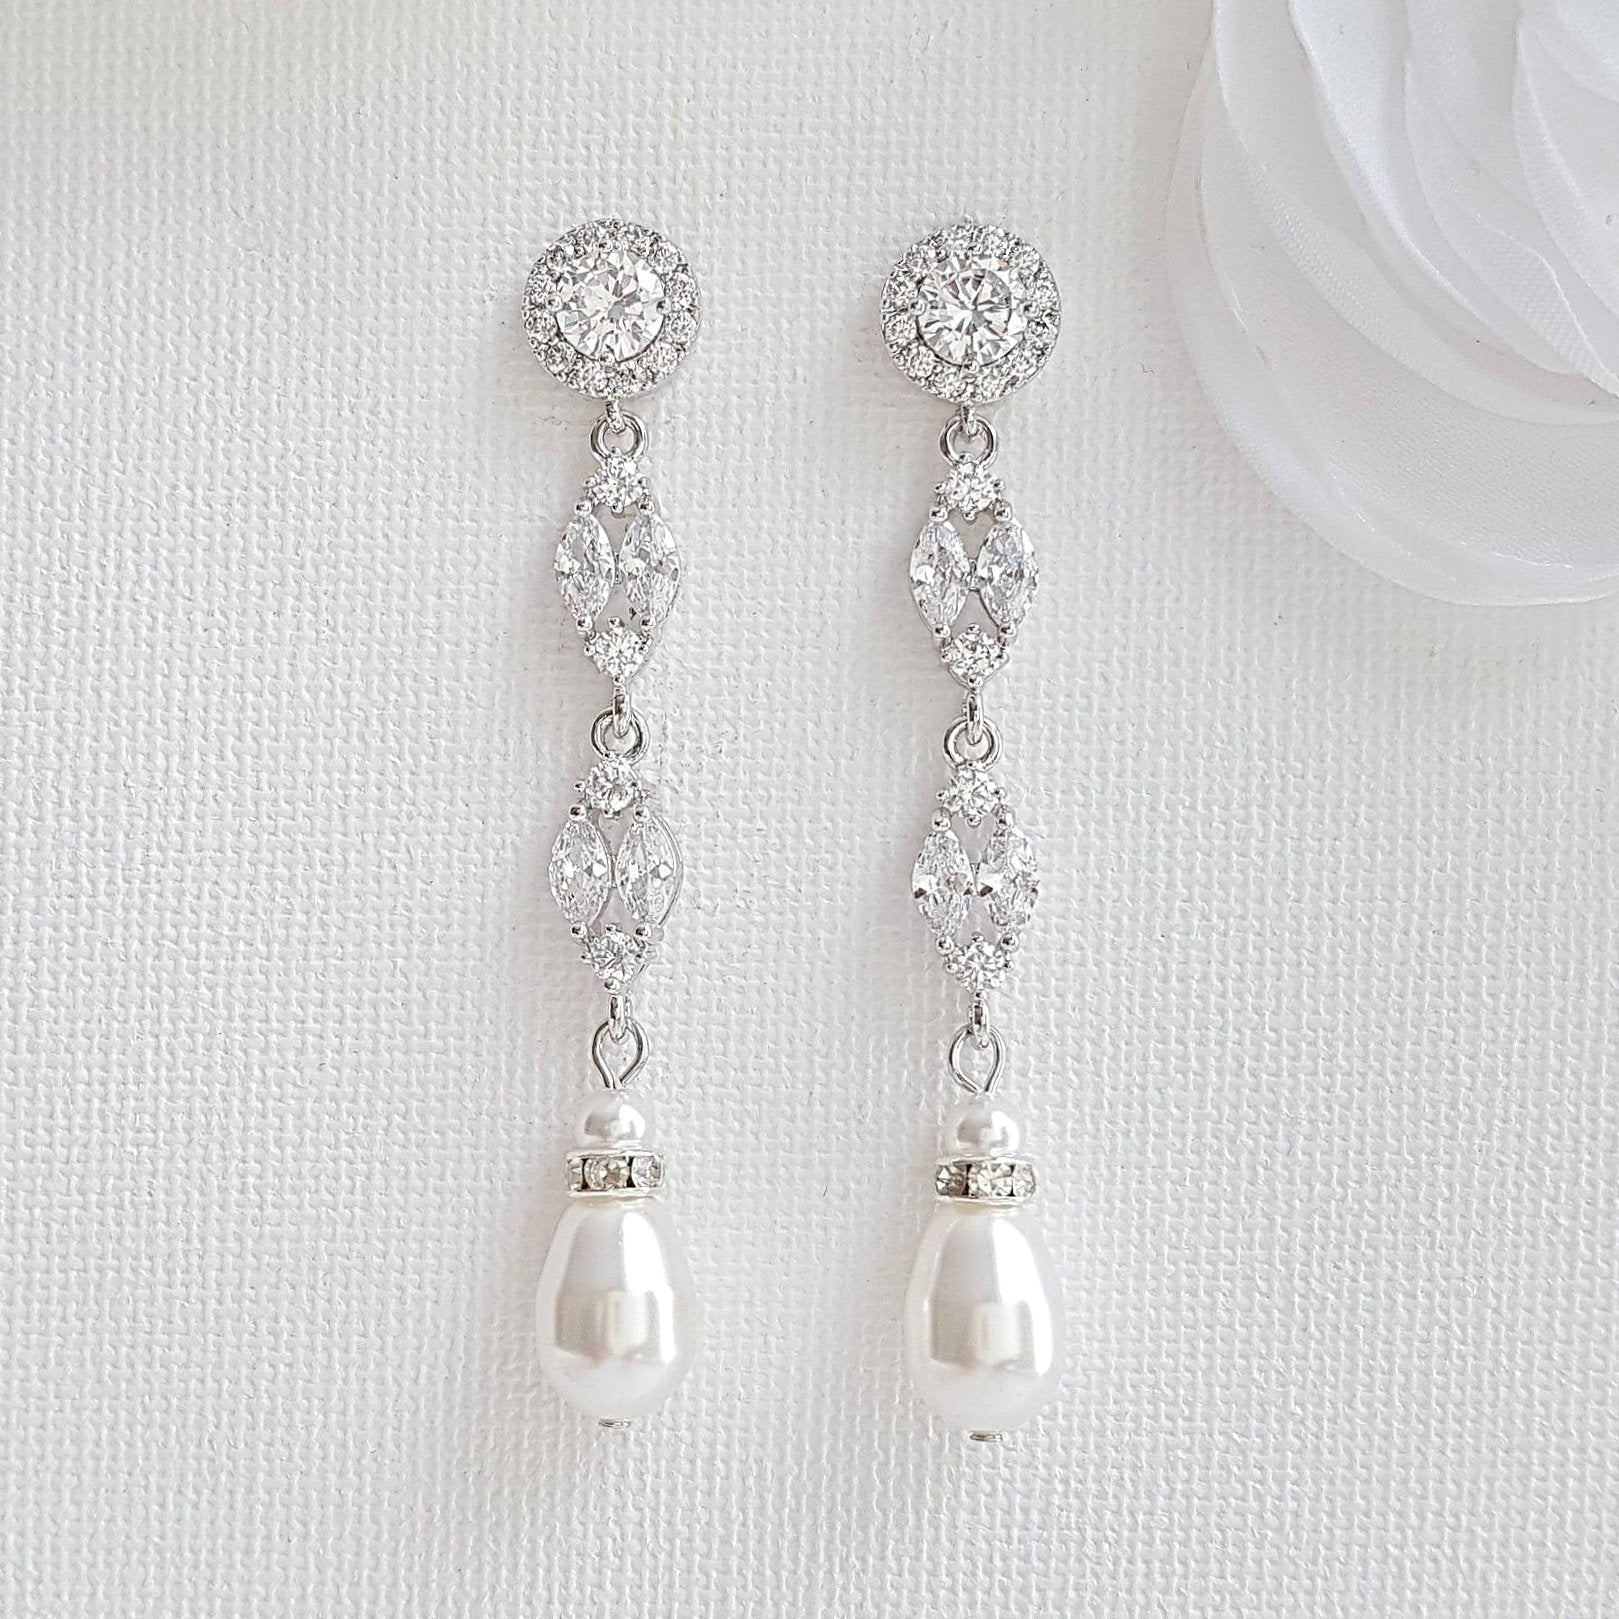 Clip On earrings for Brides and Weddings